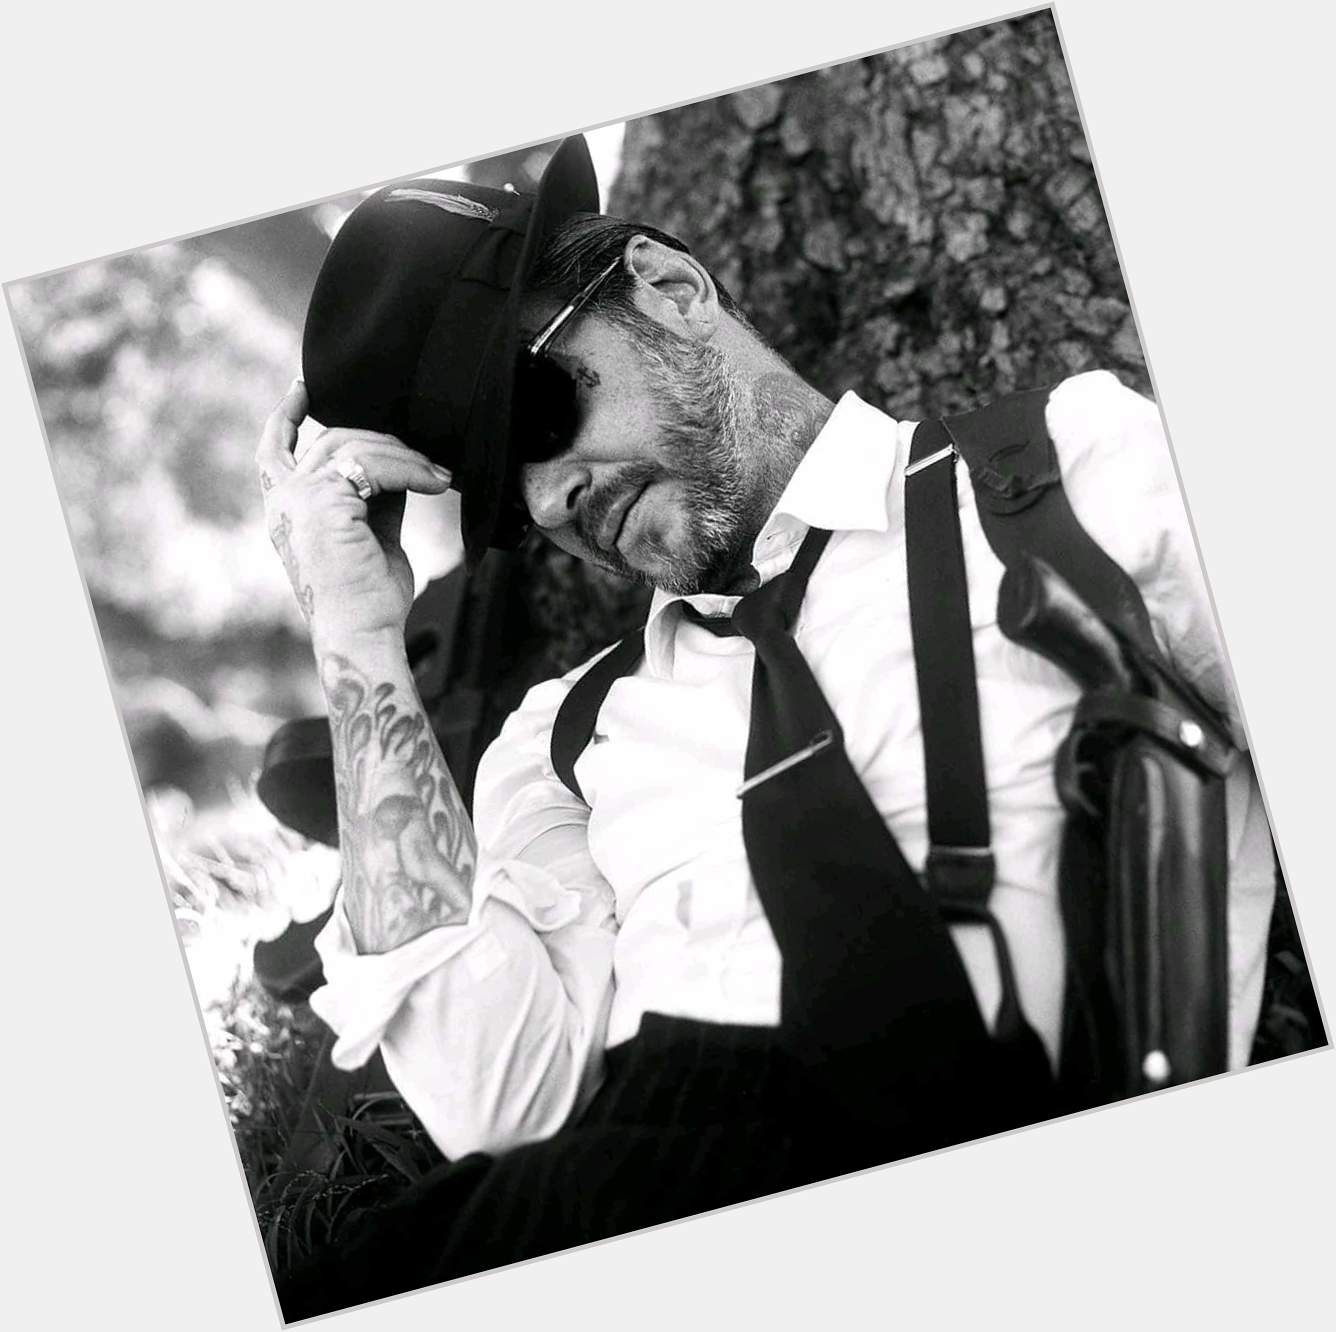 Happy birthday to Mr. Mike Ness, of the legendary Social Distortion. One of my all time favorite bands! 